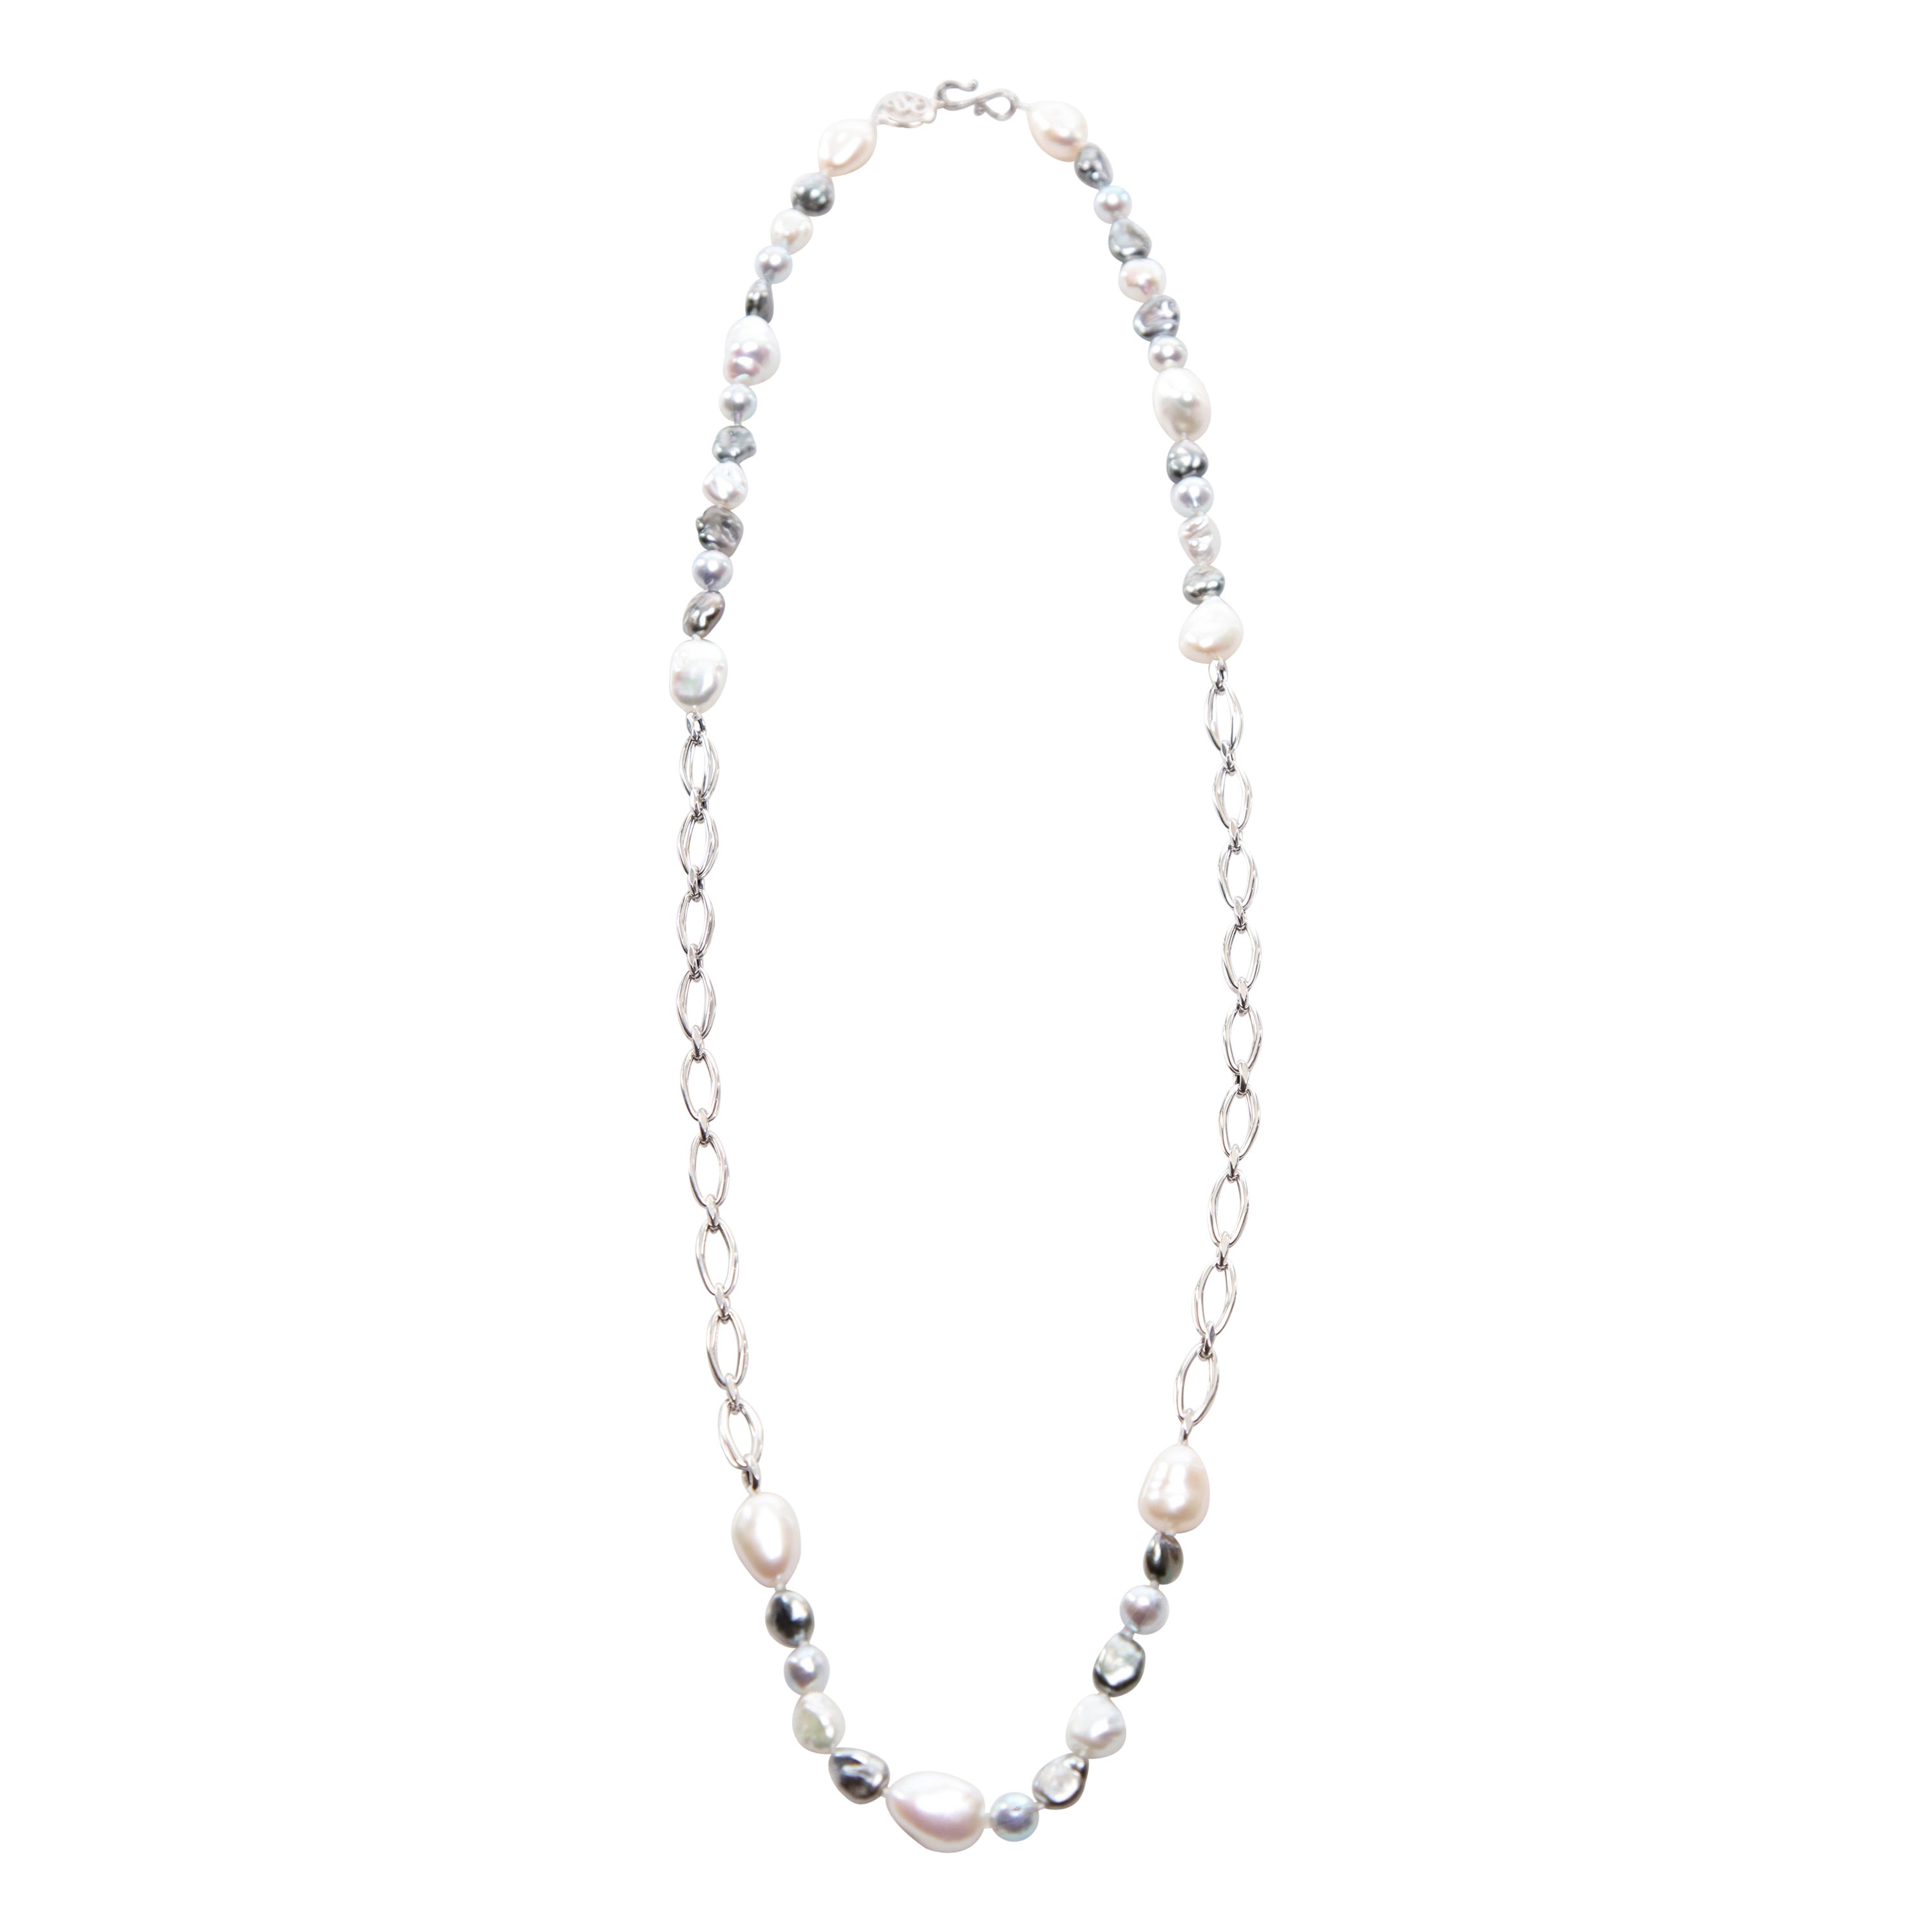 Akoya, Keshi, and South Sea Pearls on a White Gold Chain